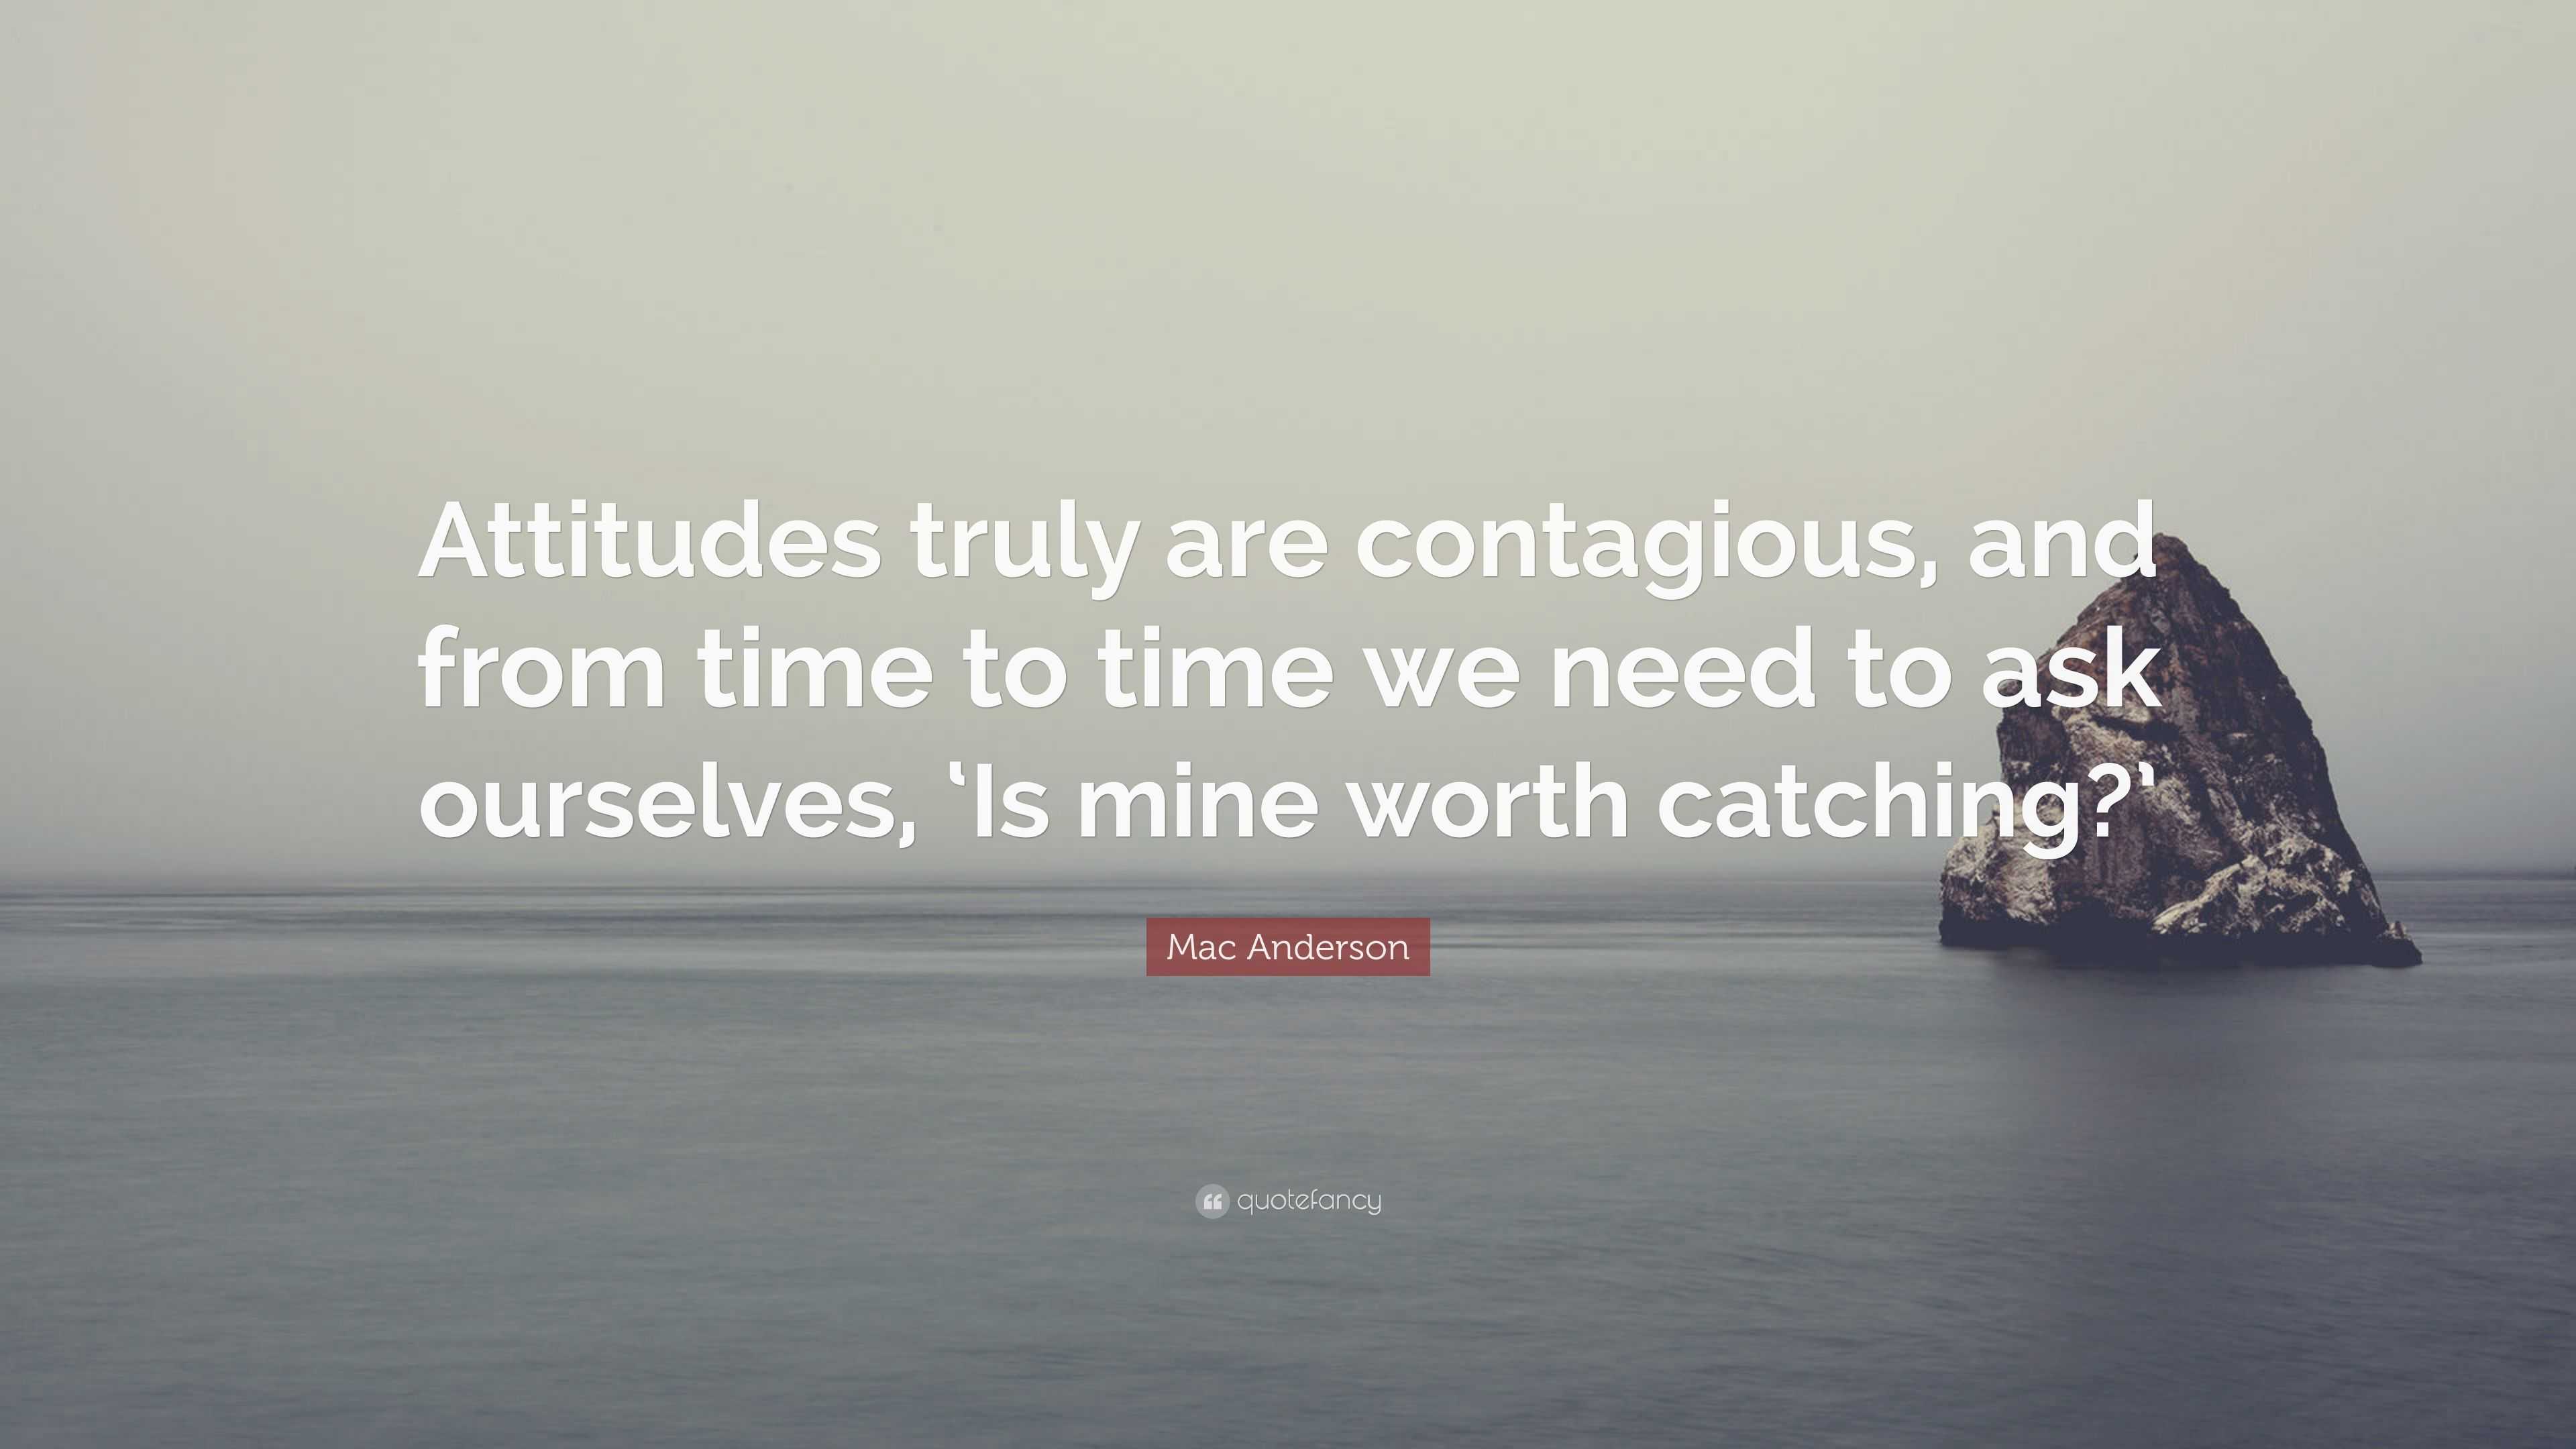 Mac Anderson Quote: “Attitudes truly are contagious, and from time